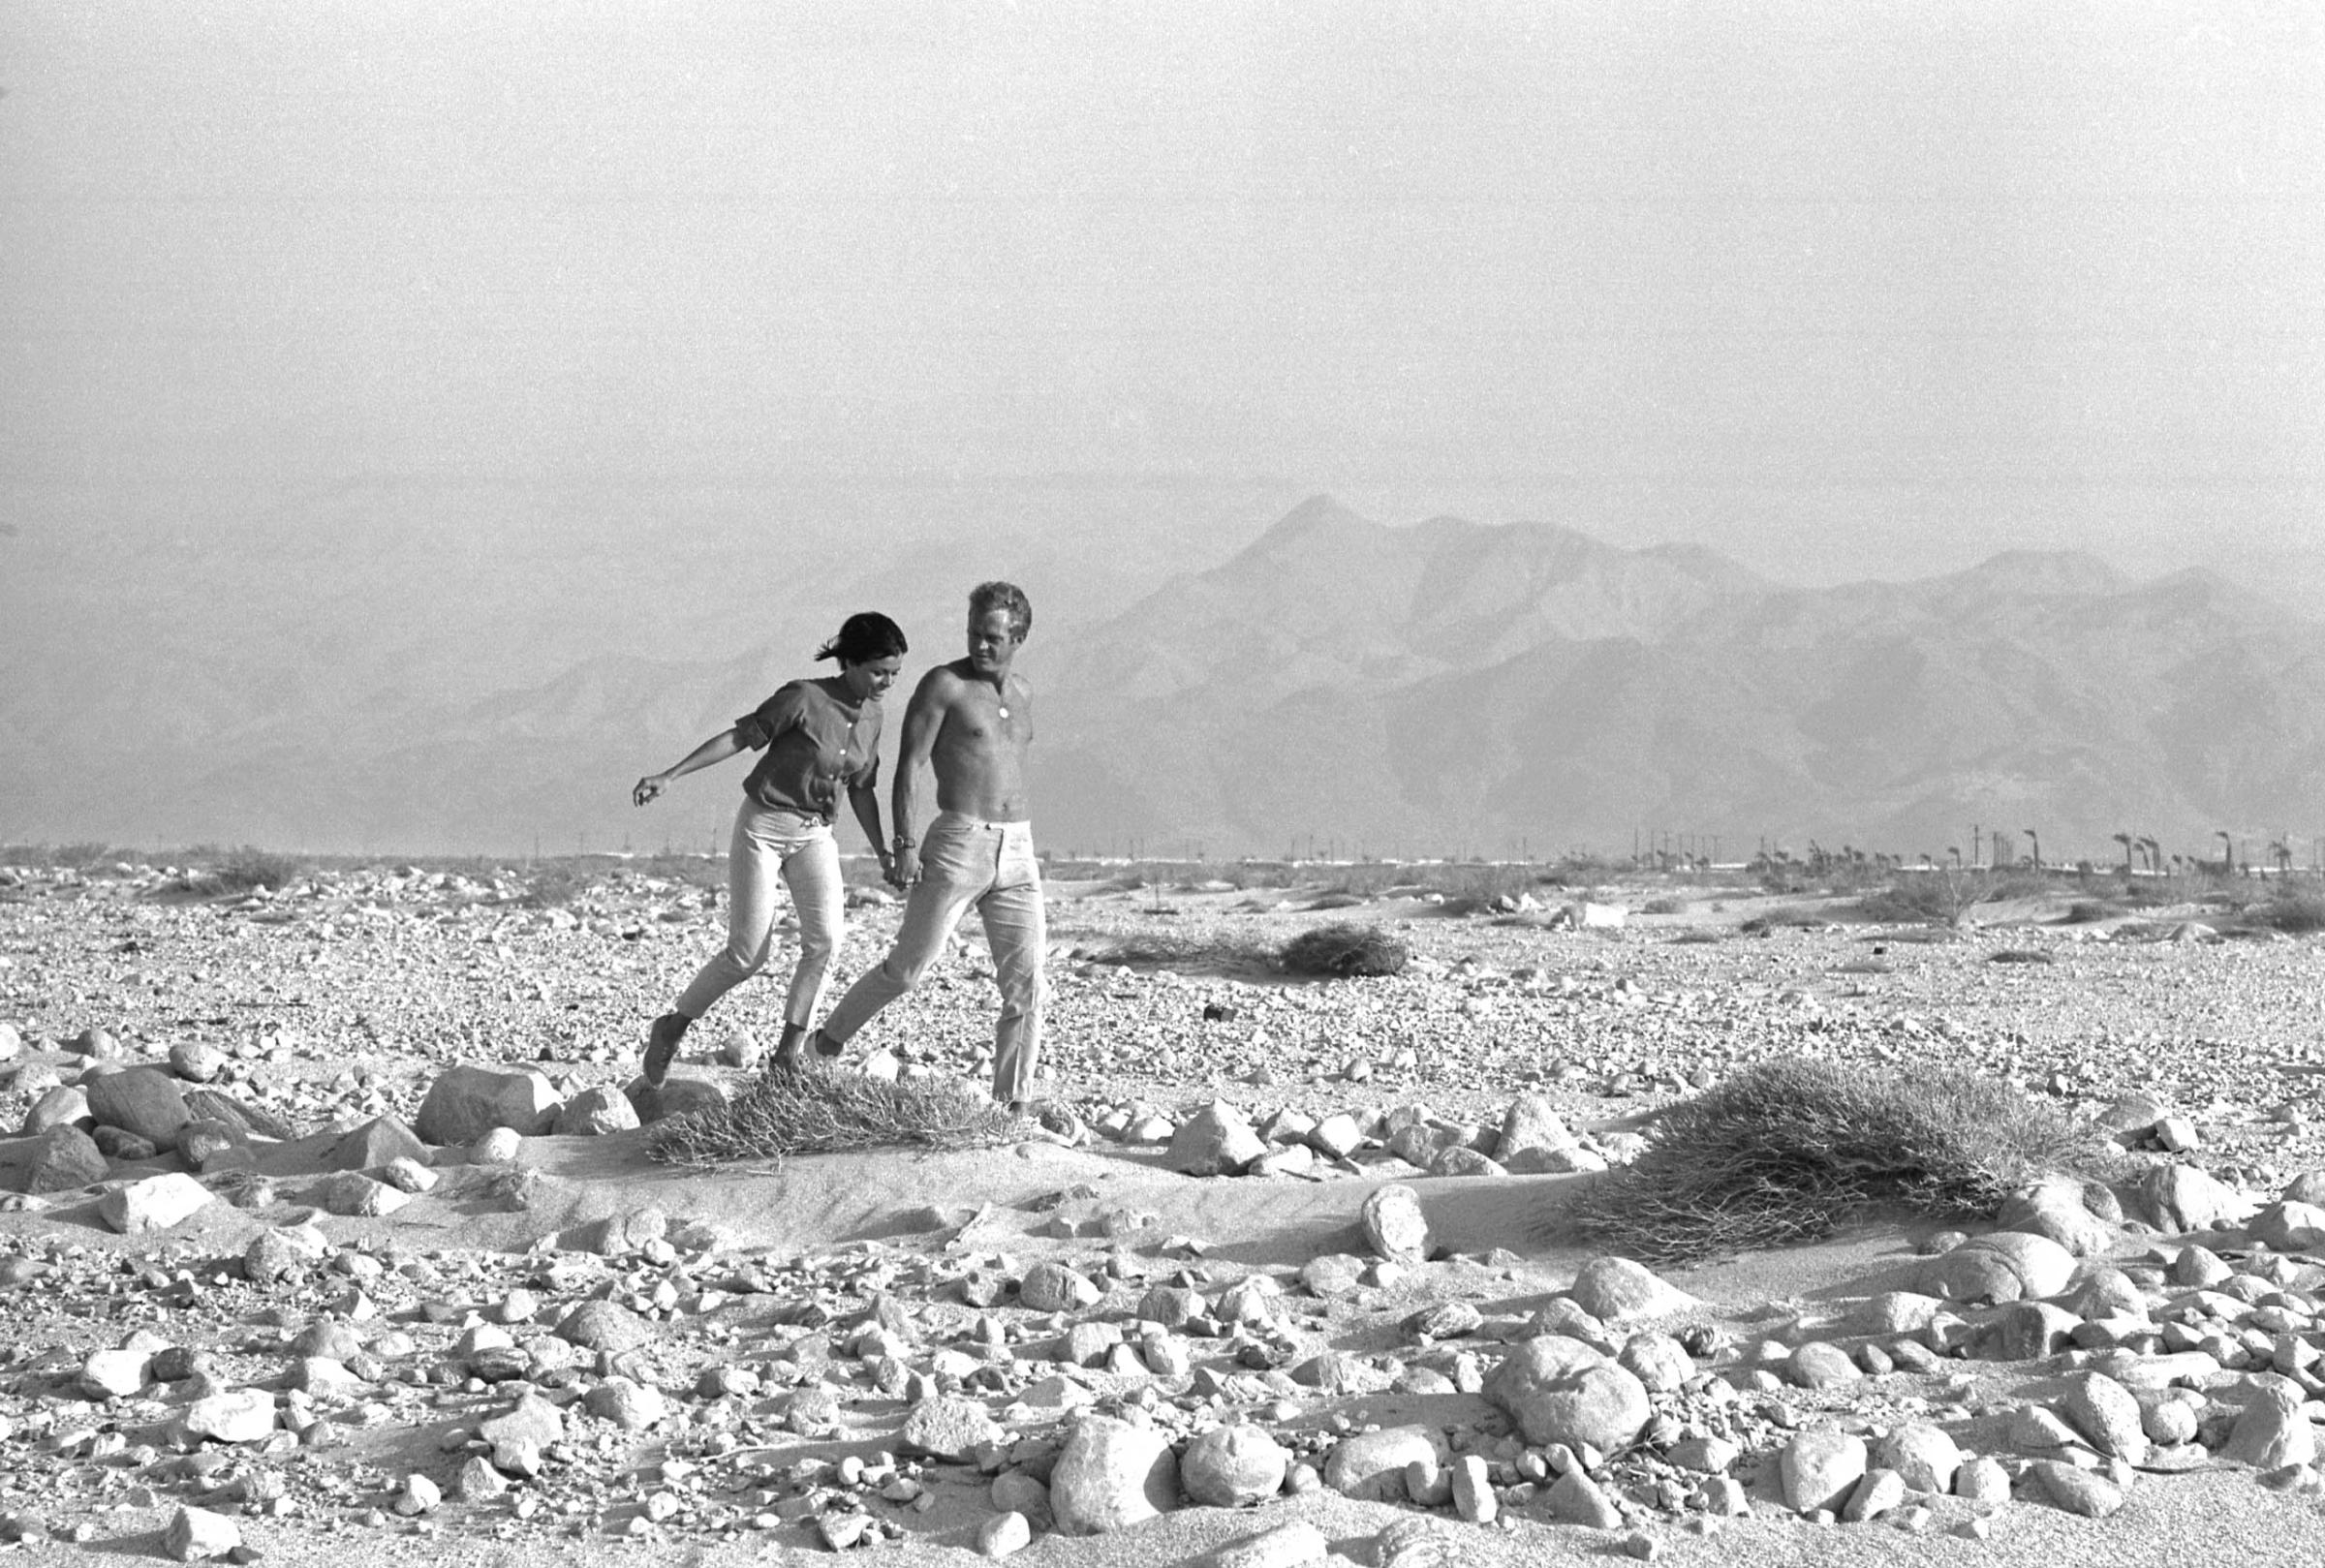 Steve McQueen and Neile Adams, his first wife, in the California desert, 1963.